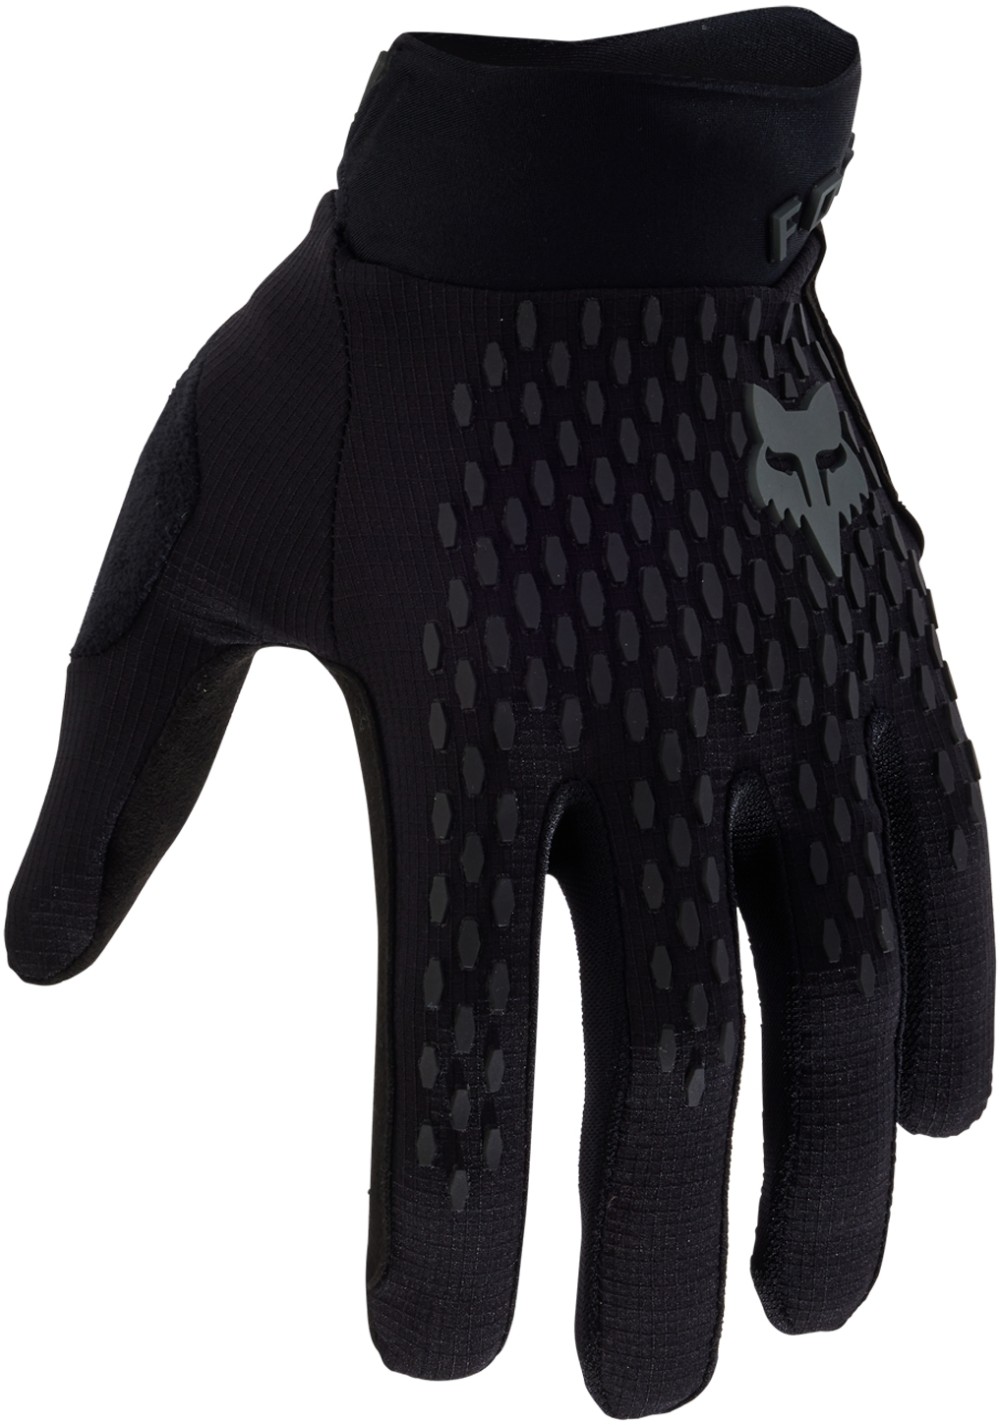 Defend Long Finger MTB Cycling Gloves image 0